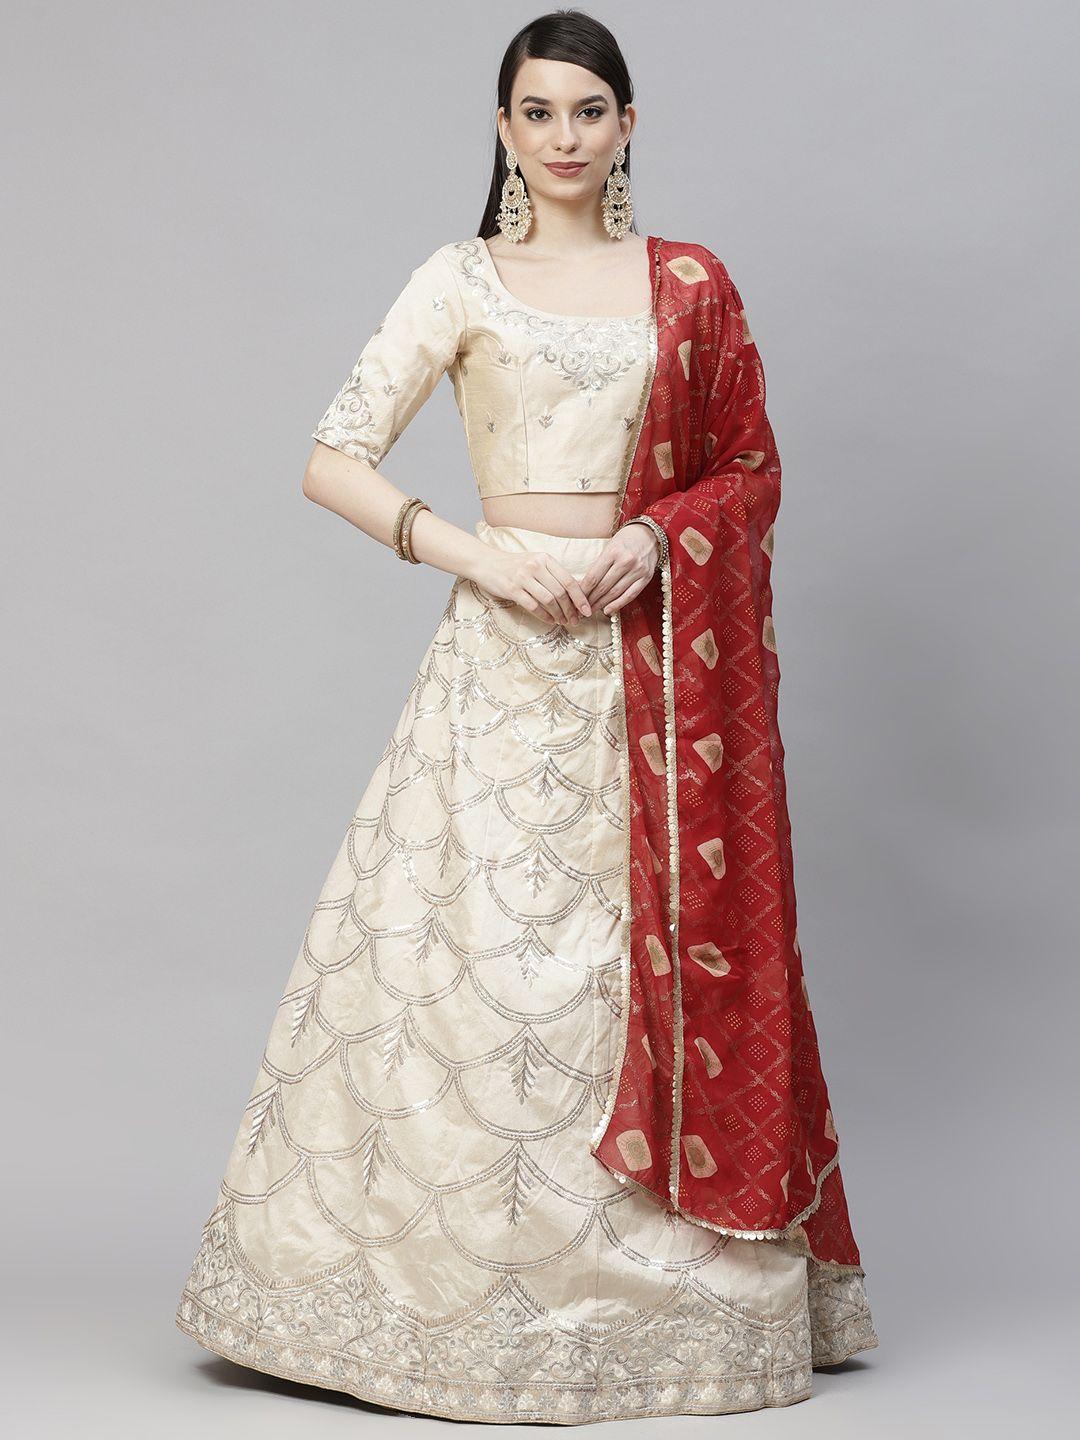 SHUBHKALA Beige & Red Embroidered Thread Work Semi-Stitched Lehenga & Unstitched Blouse With Dupatta